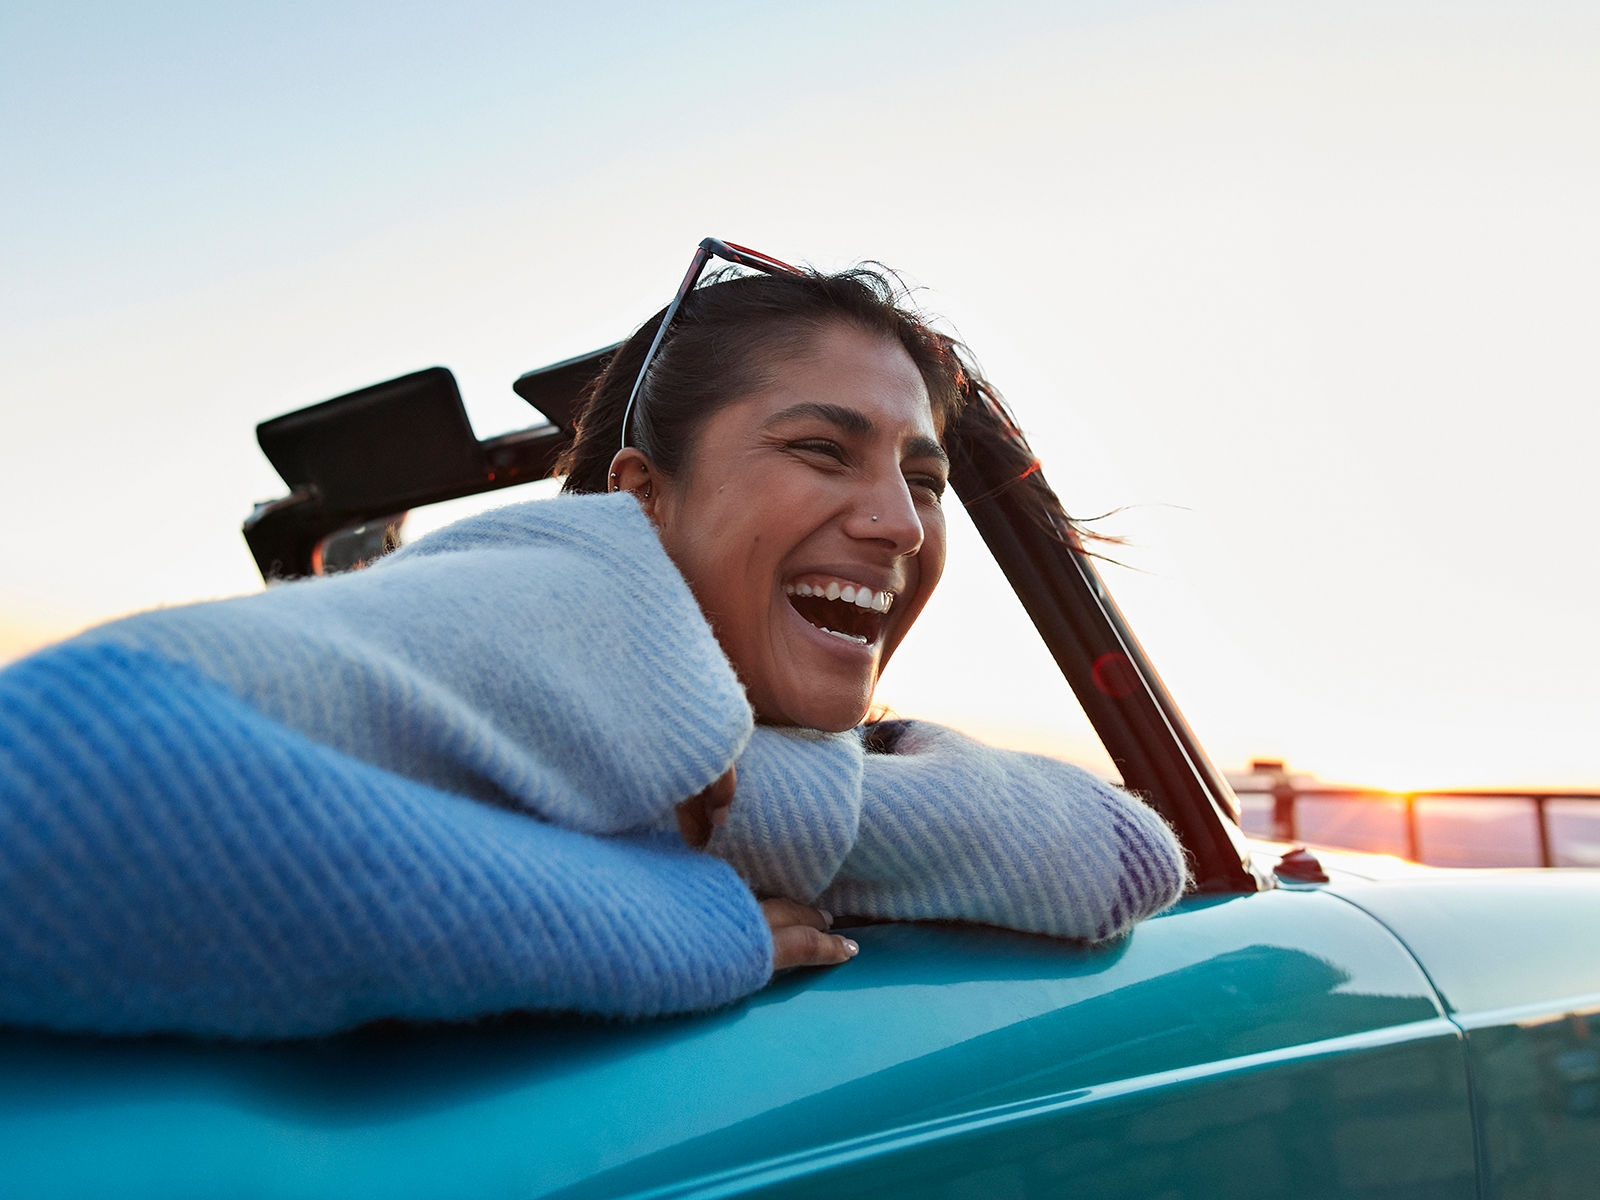 Cheerful young woman in convertible car enjoying road trip during sunset